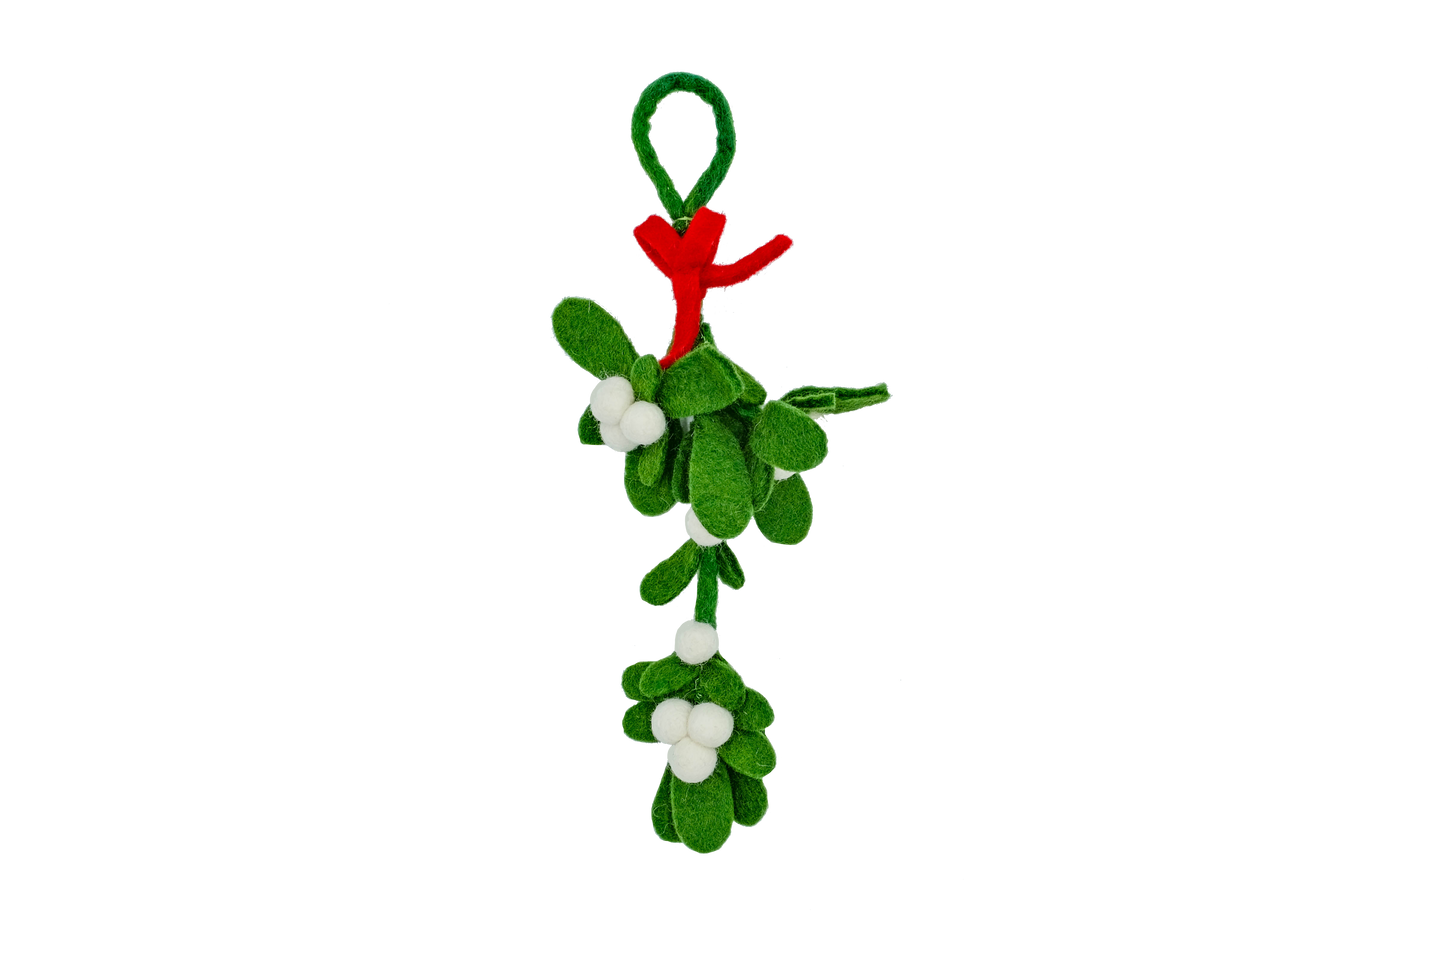 This Global Groove Life, handmade, ethical, fair trade, eco-friendly, sustainable, green felt Mistletoe with red ribbon and white berries was created by artisans in Kathmandu Nepal. It will bring Christmas cheer to your home this holiday season.